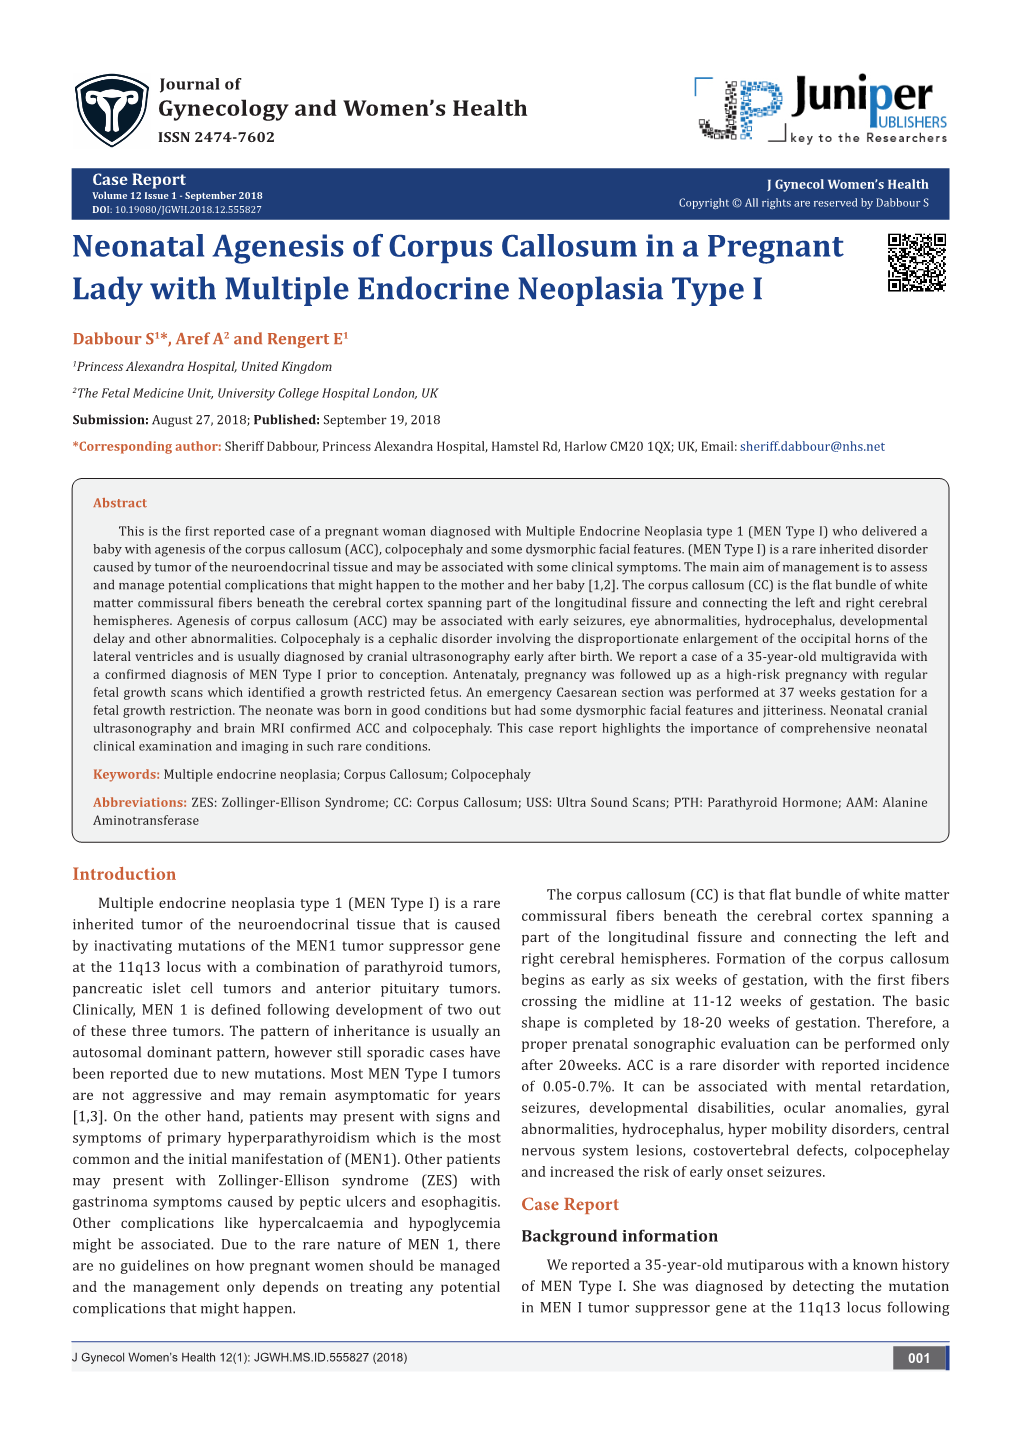 Neonatal Agenesis of Corpus Callosum in a Pregnant Lady with Multiple Endocrine Neoplasia Type I